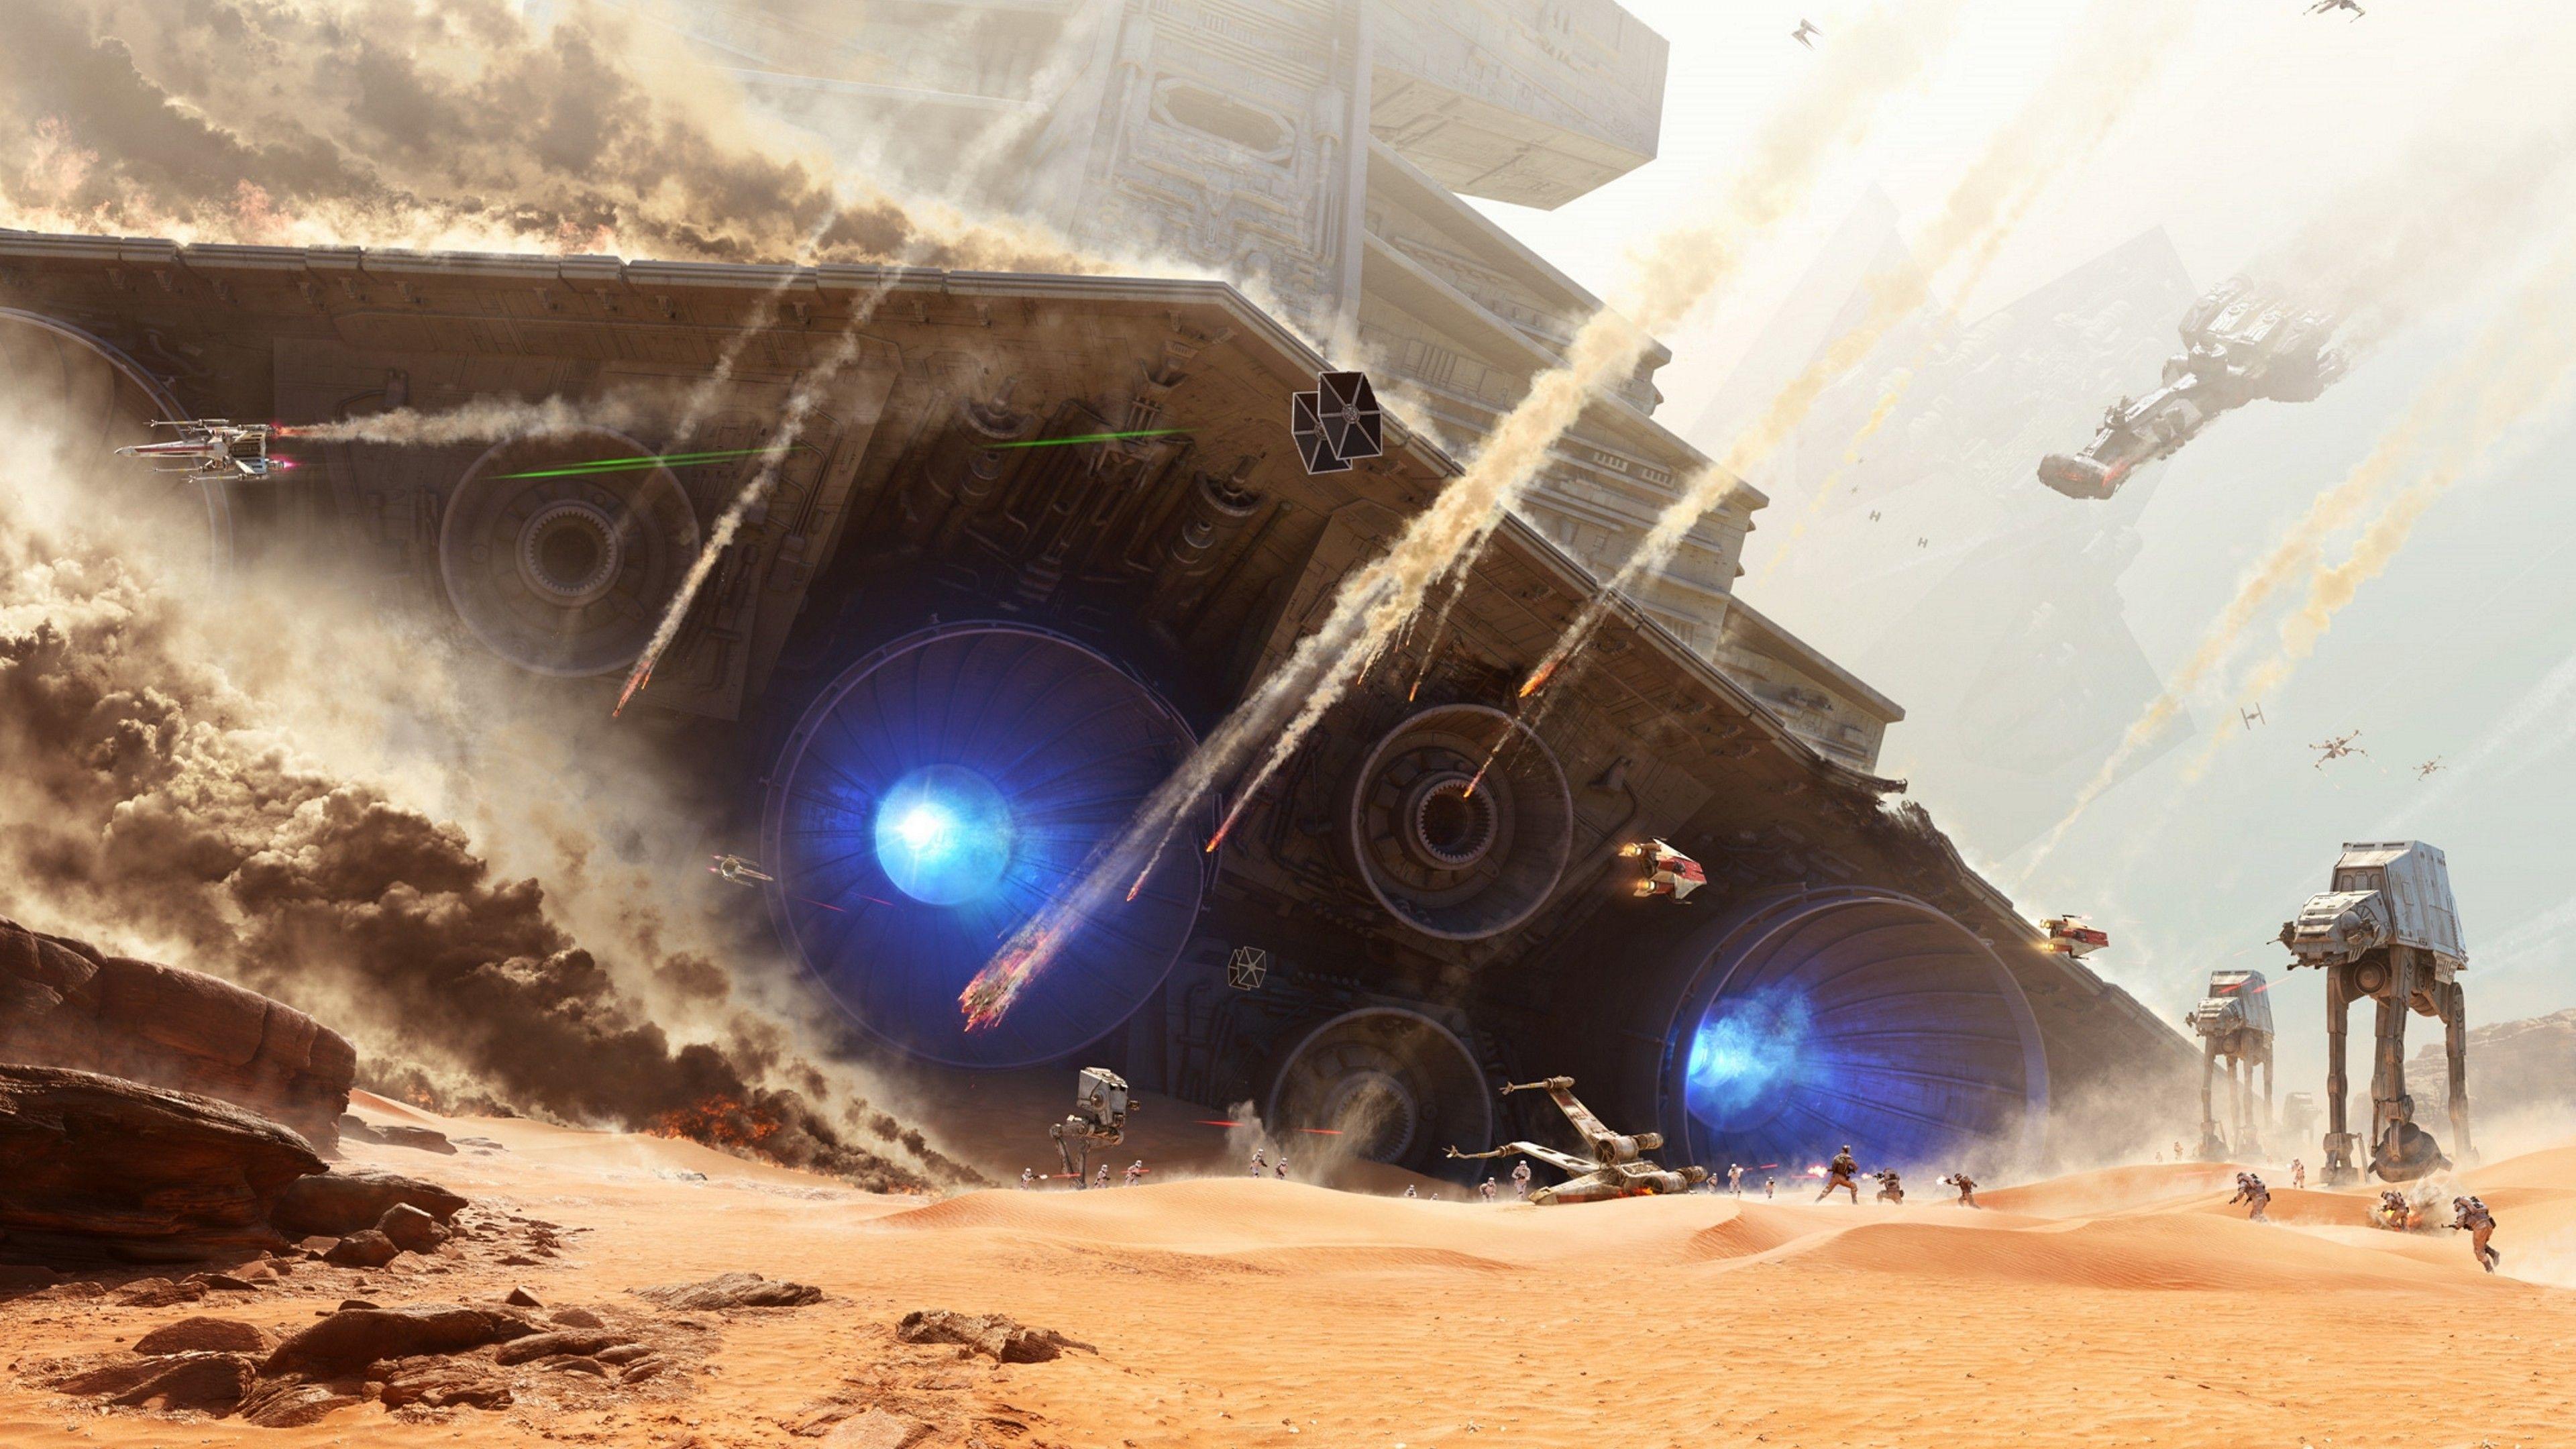 Desert, X Wing, Soldier, Tie Fighter, AT AT, Video Games, Star